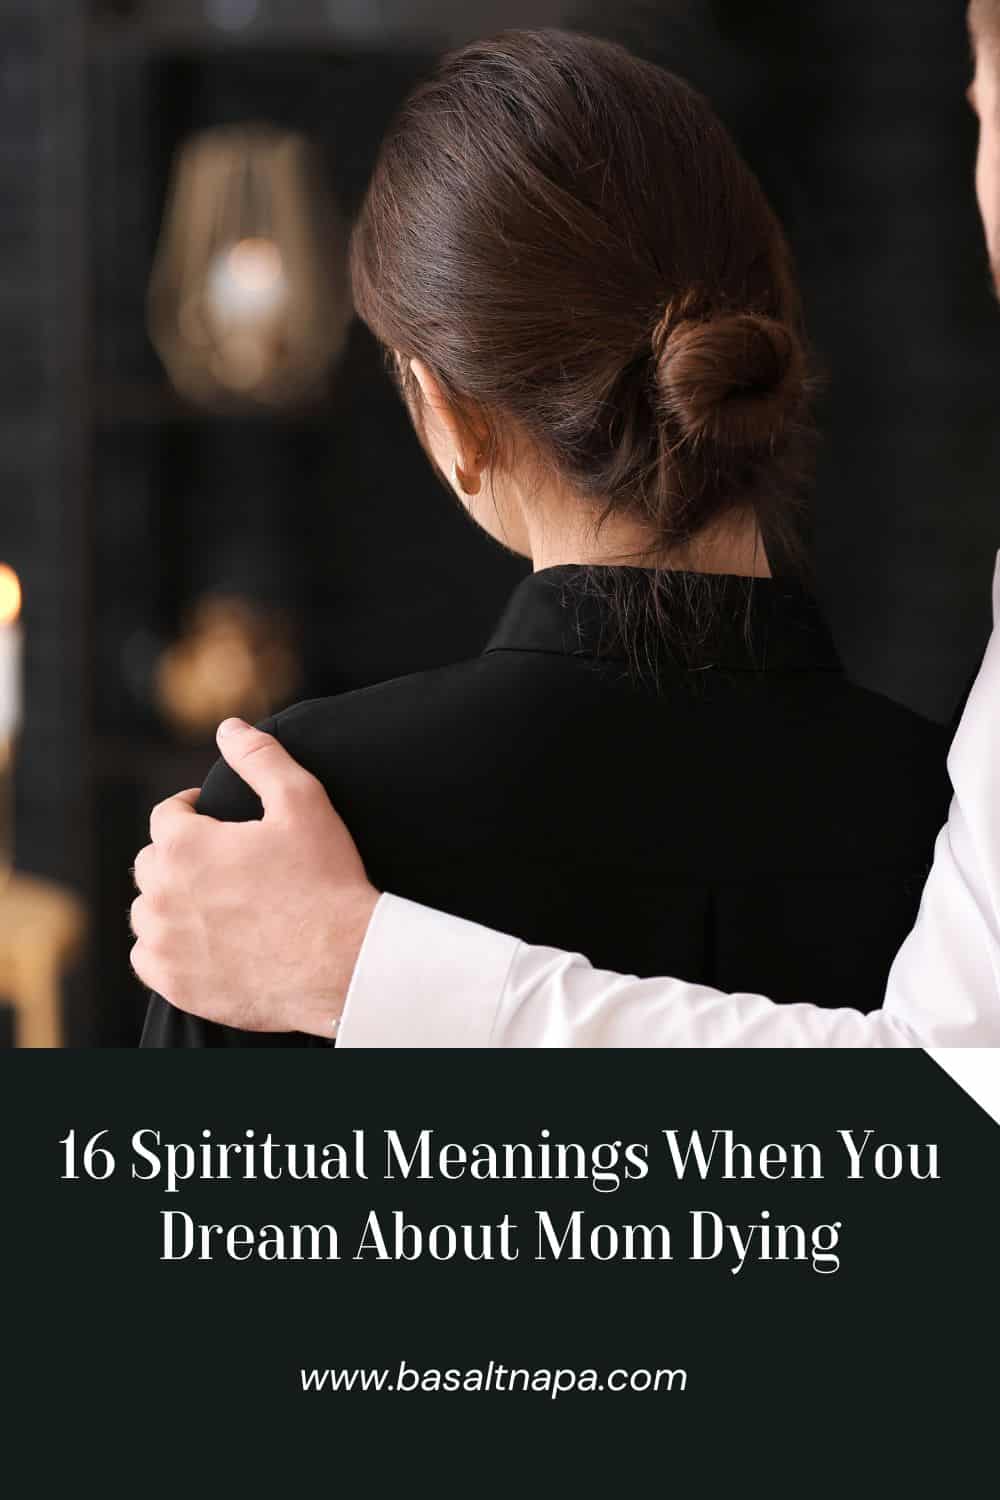 16 Spiritual Meanings When You Dream About Mom Dying